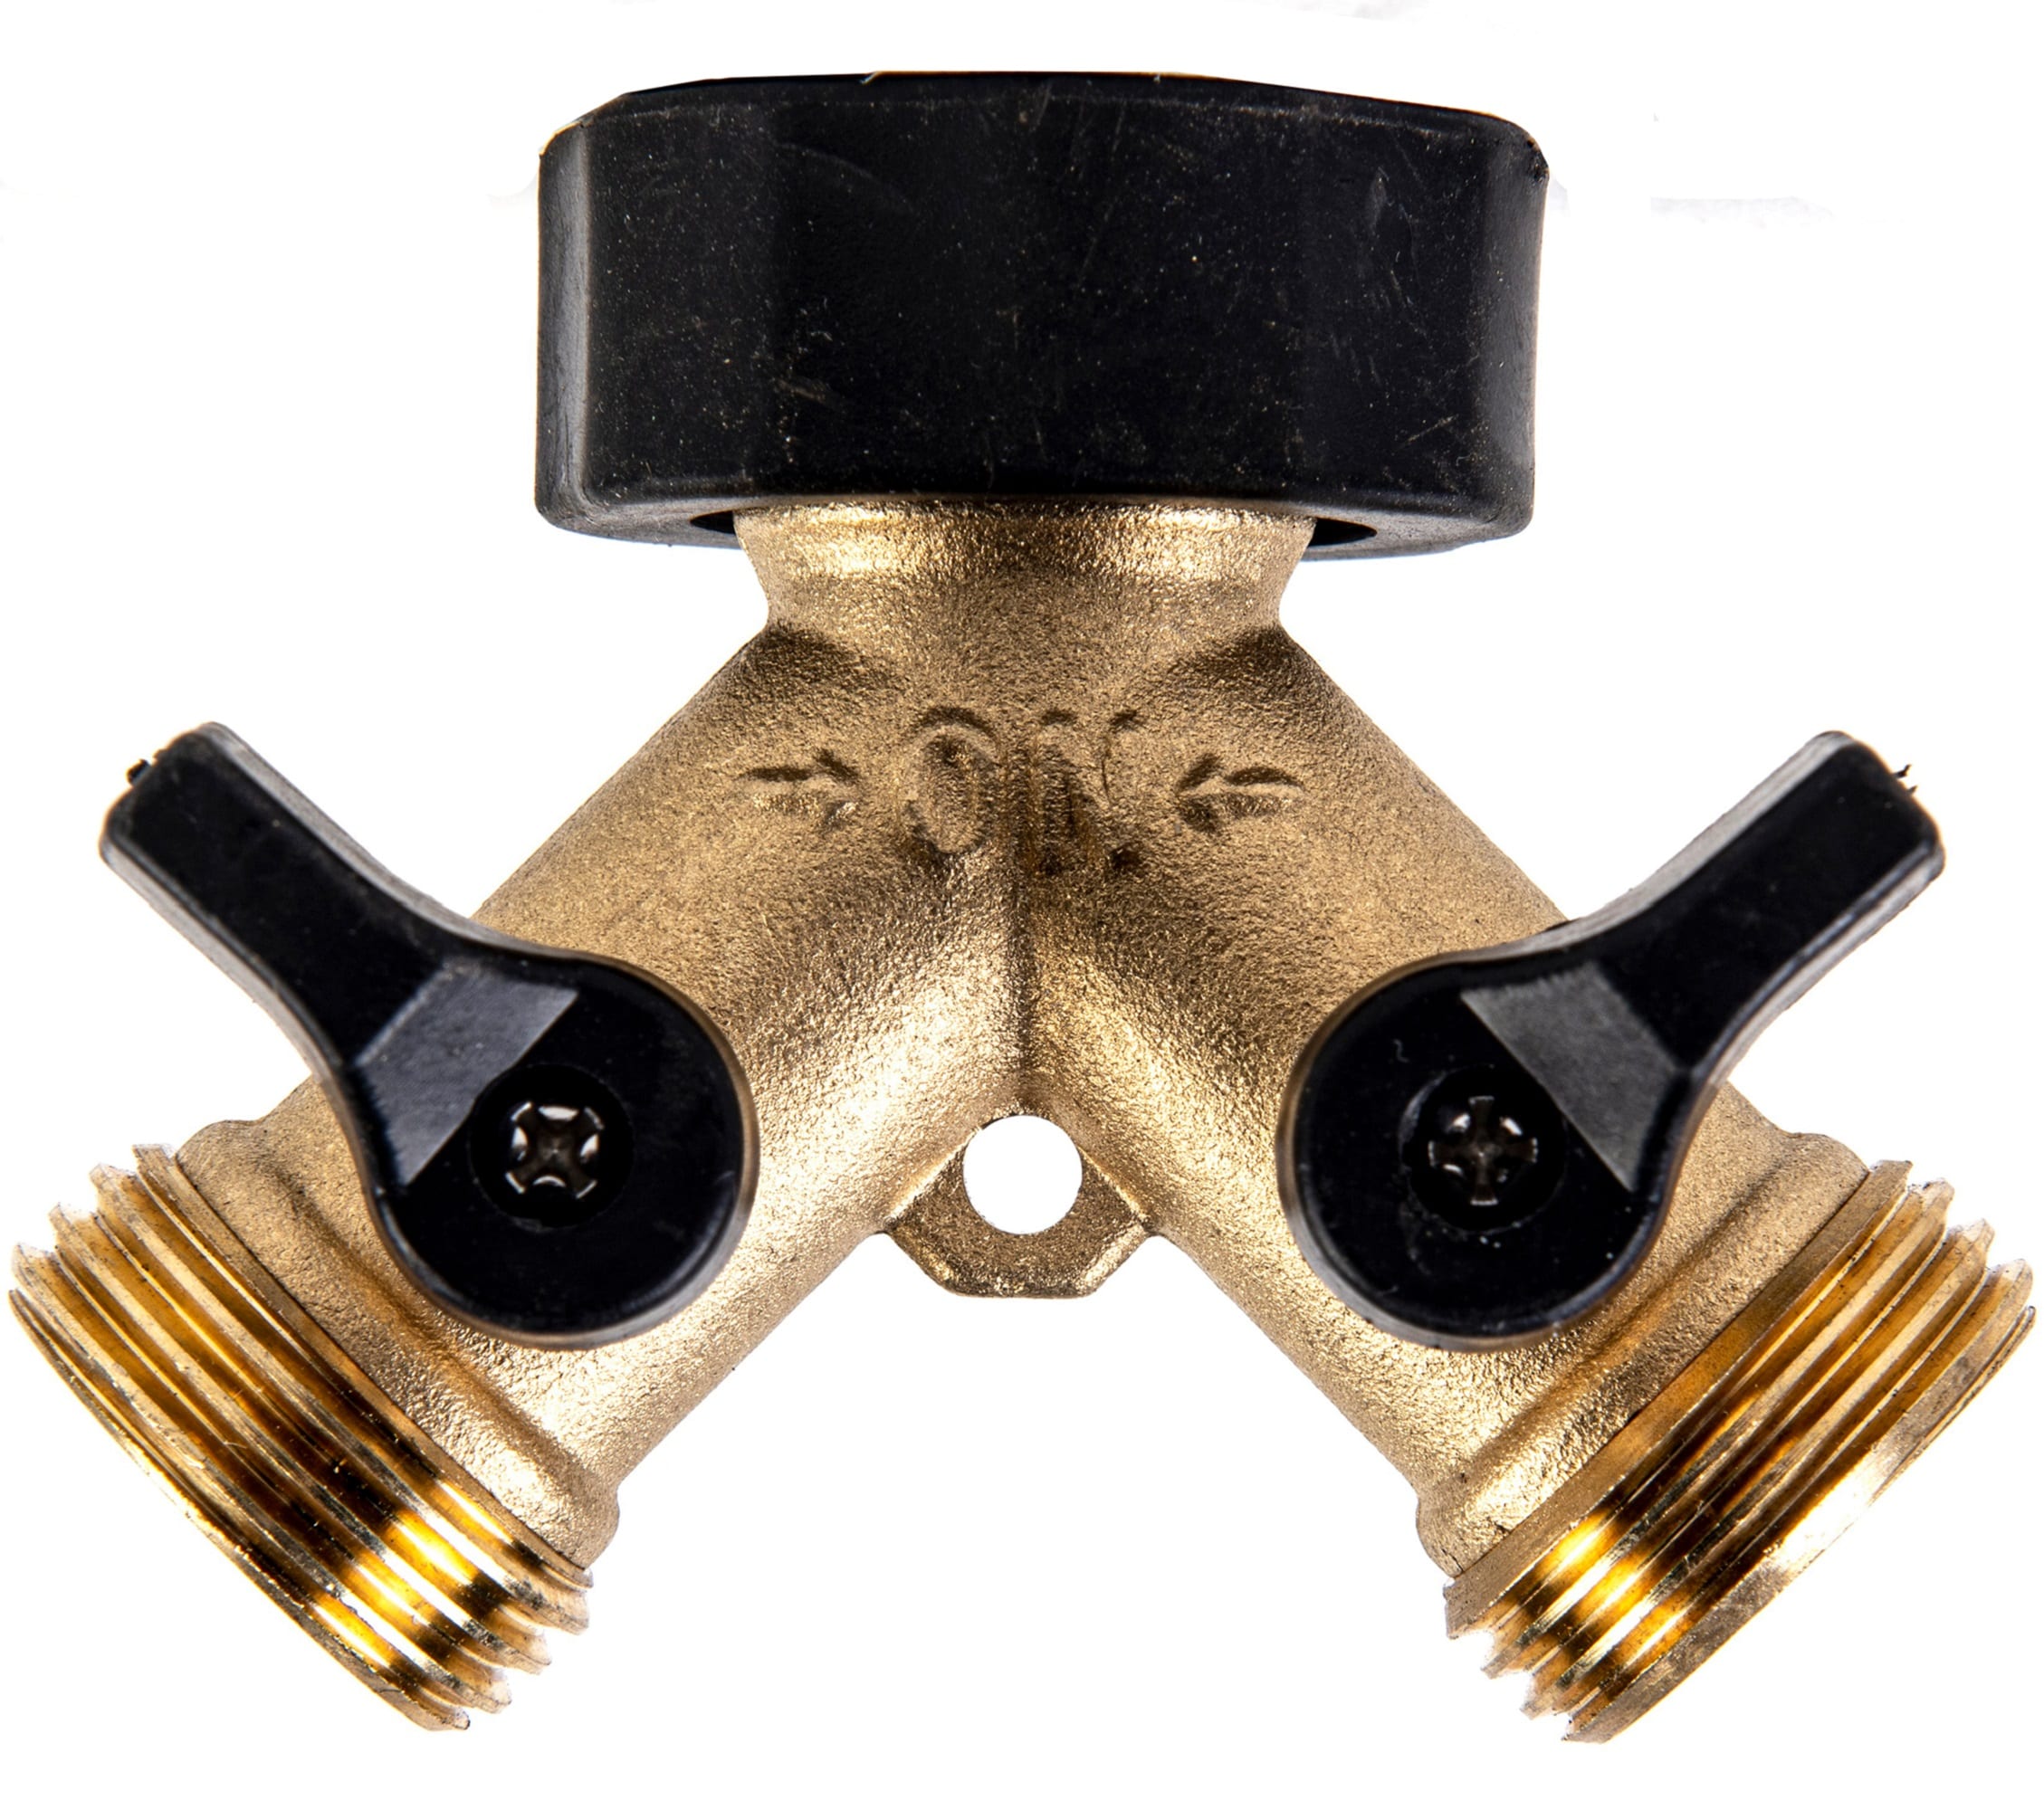 Hose Pipe Inline Tap Shut Off Valve 1/2" Fitting Connector 2 pack Irrigation Tap 